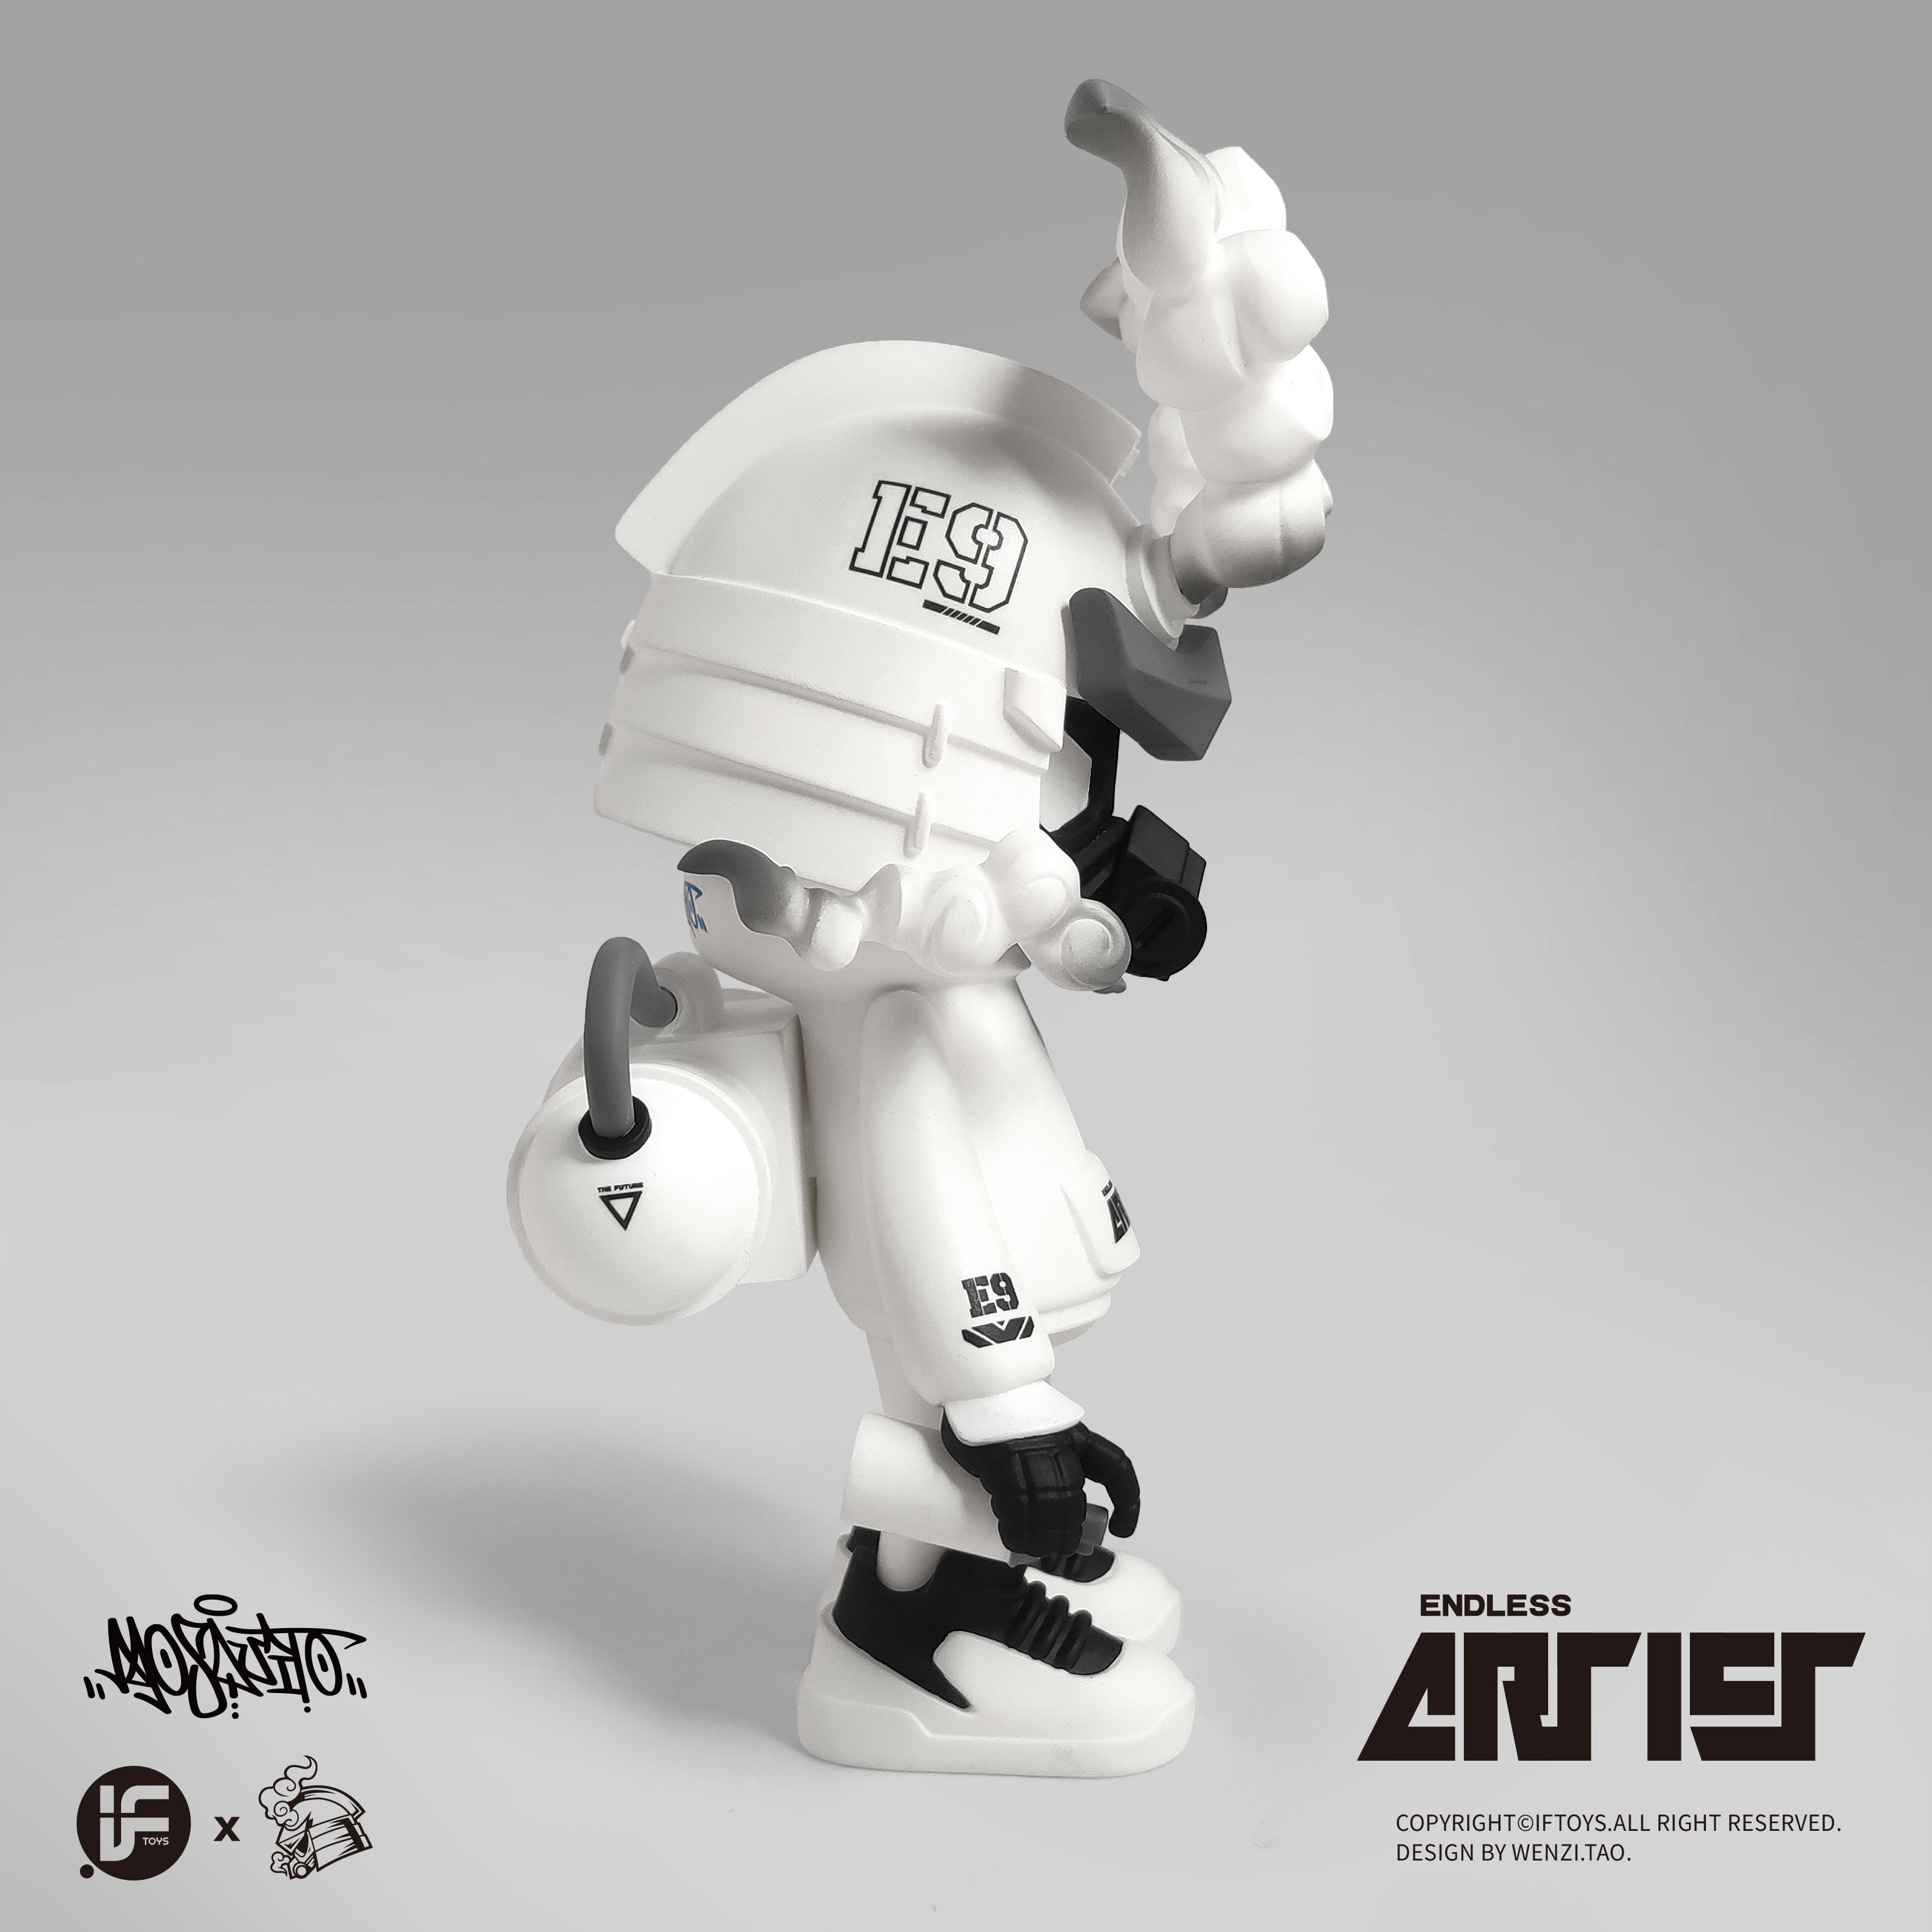 Endless Artist Black & White - Limited Edition By Wenzi.Tao x Iftoys